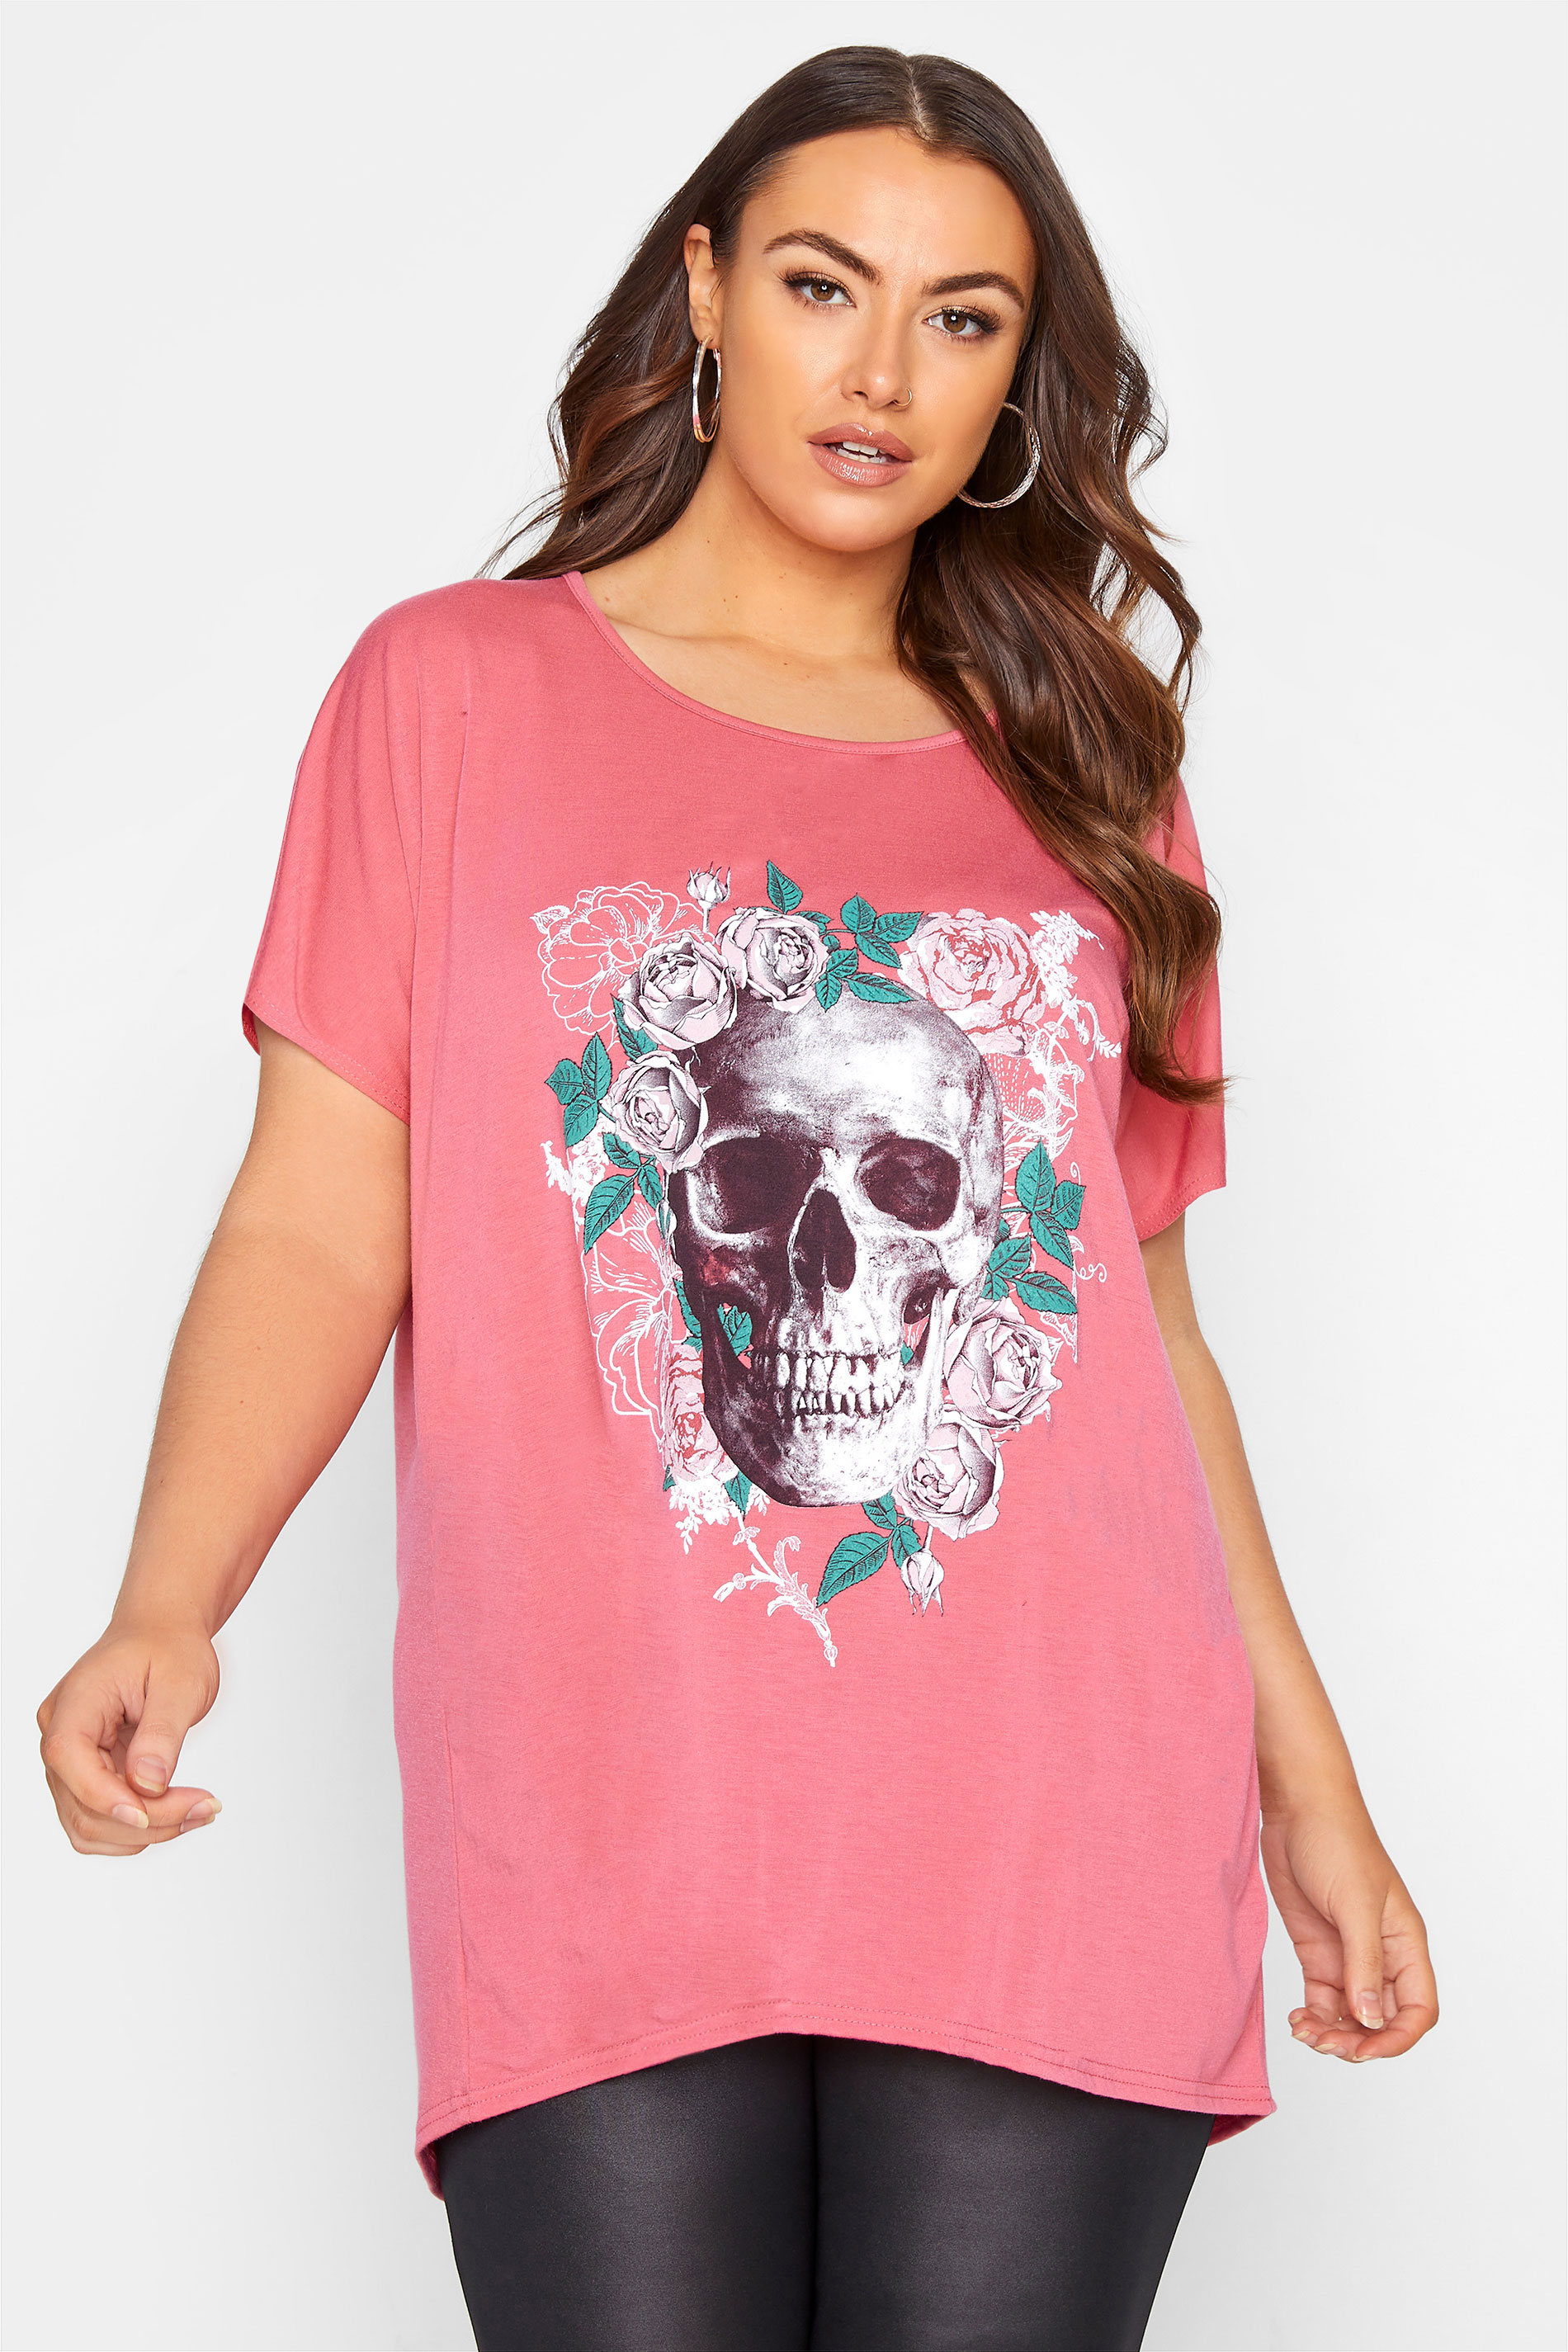 Grande taille  Tops Grande taille  Tops Jersey | Top Rose Corail Roses & Squelette - SV23663